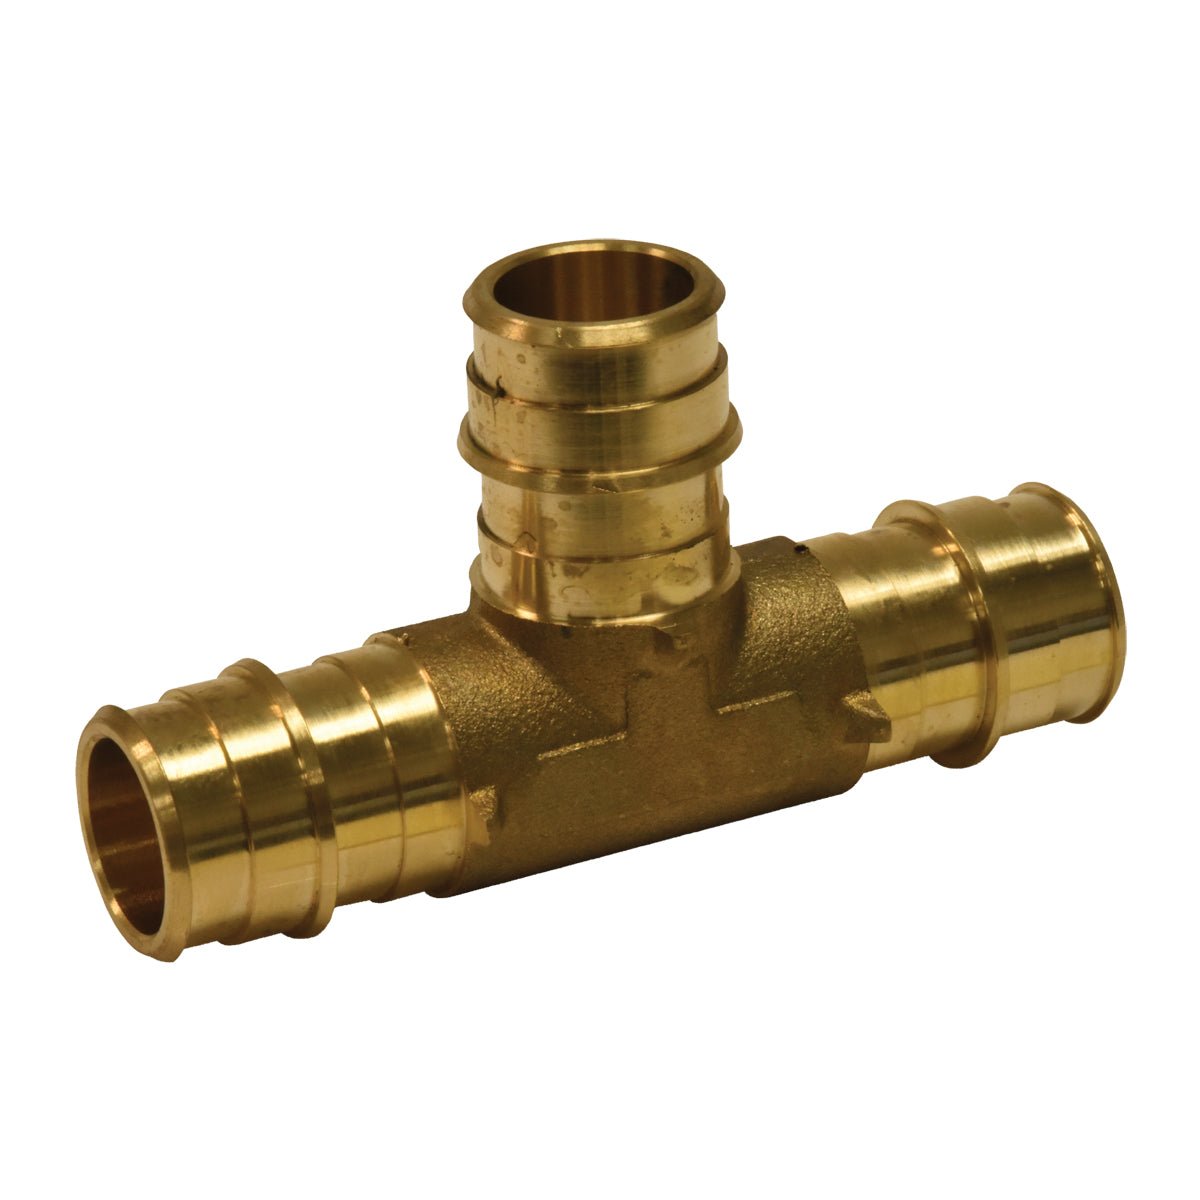 Eastman Brass Expansion PEX Tee – 1 in. x 3/4 in. x 3/4 in.